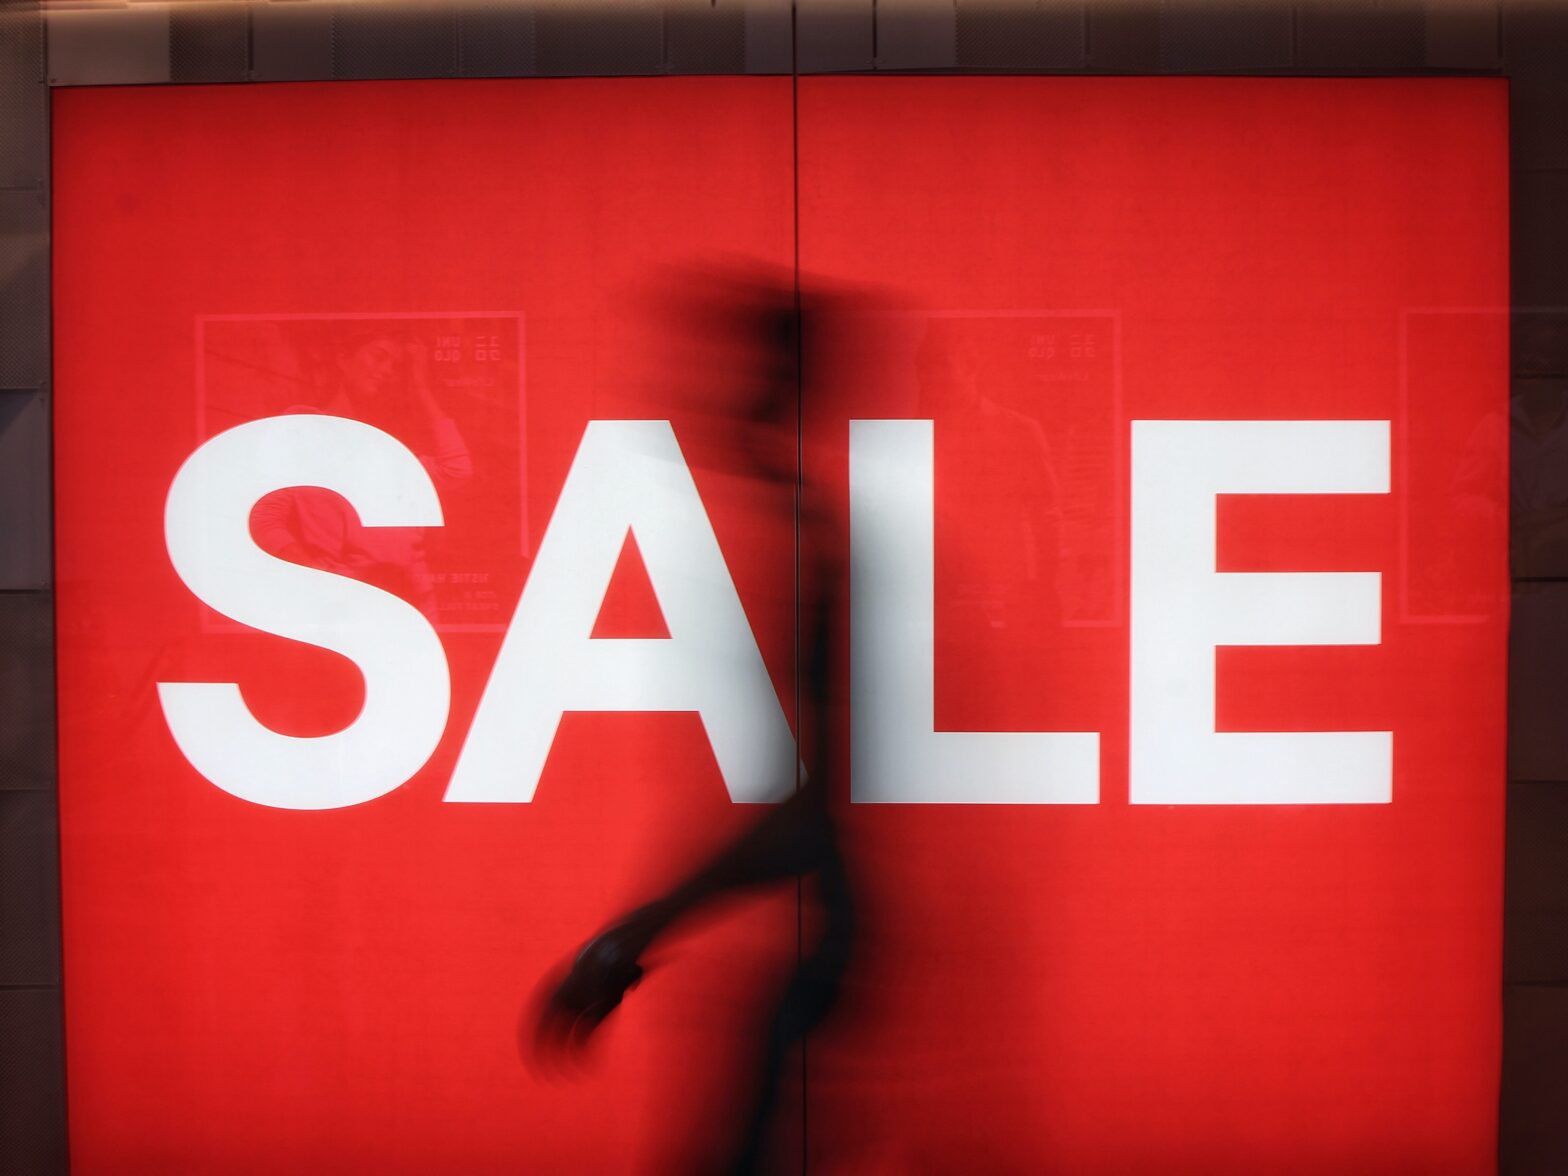 Large red sale sign with human figure moving in background